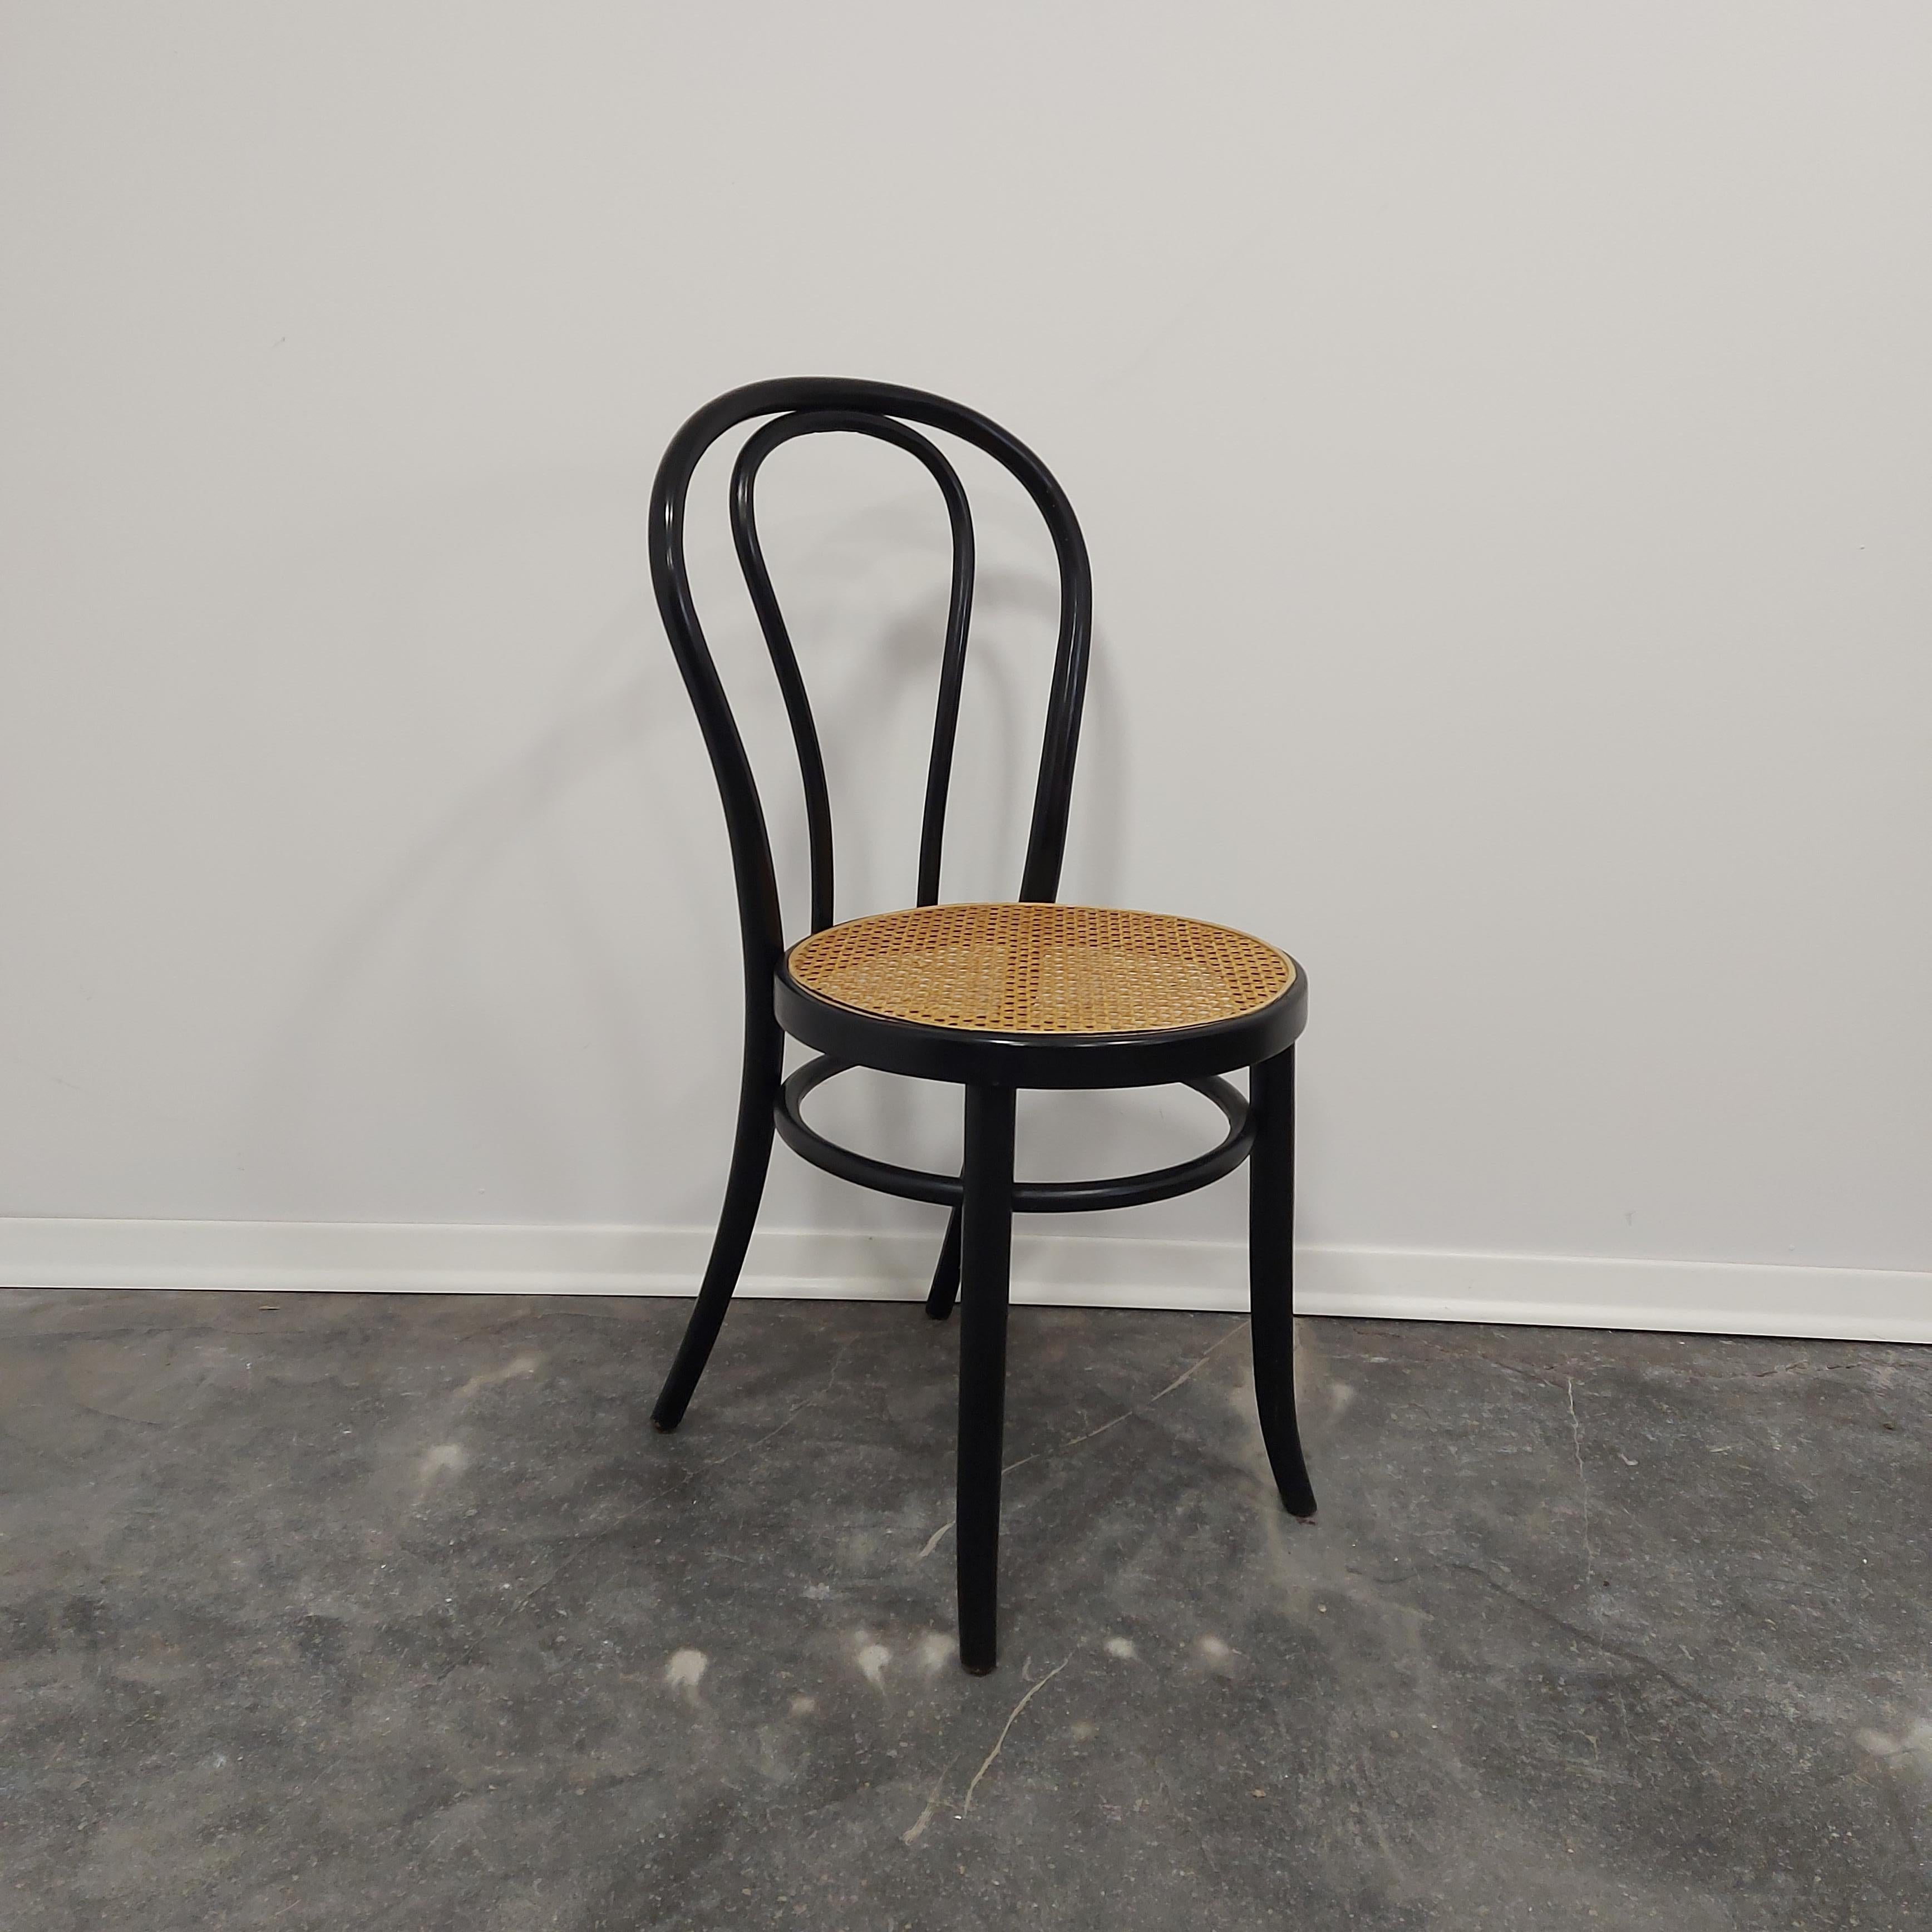 Chair by Thonet, No. 18 